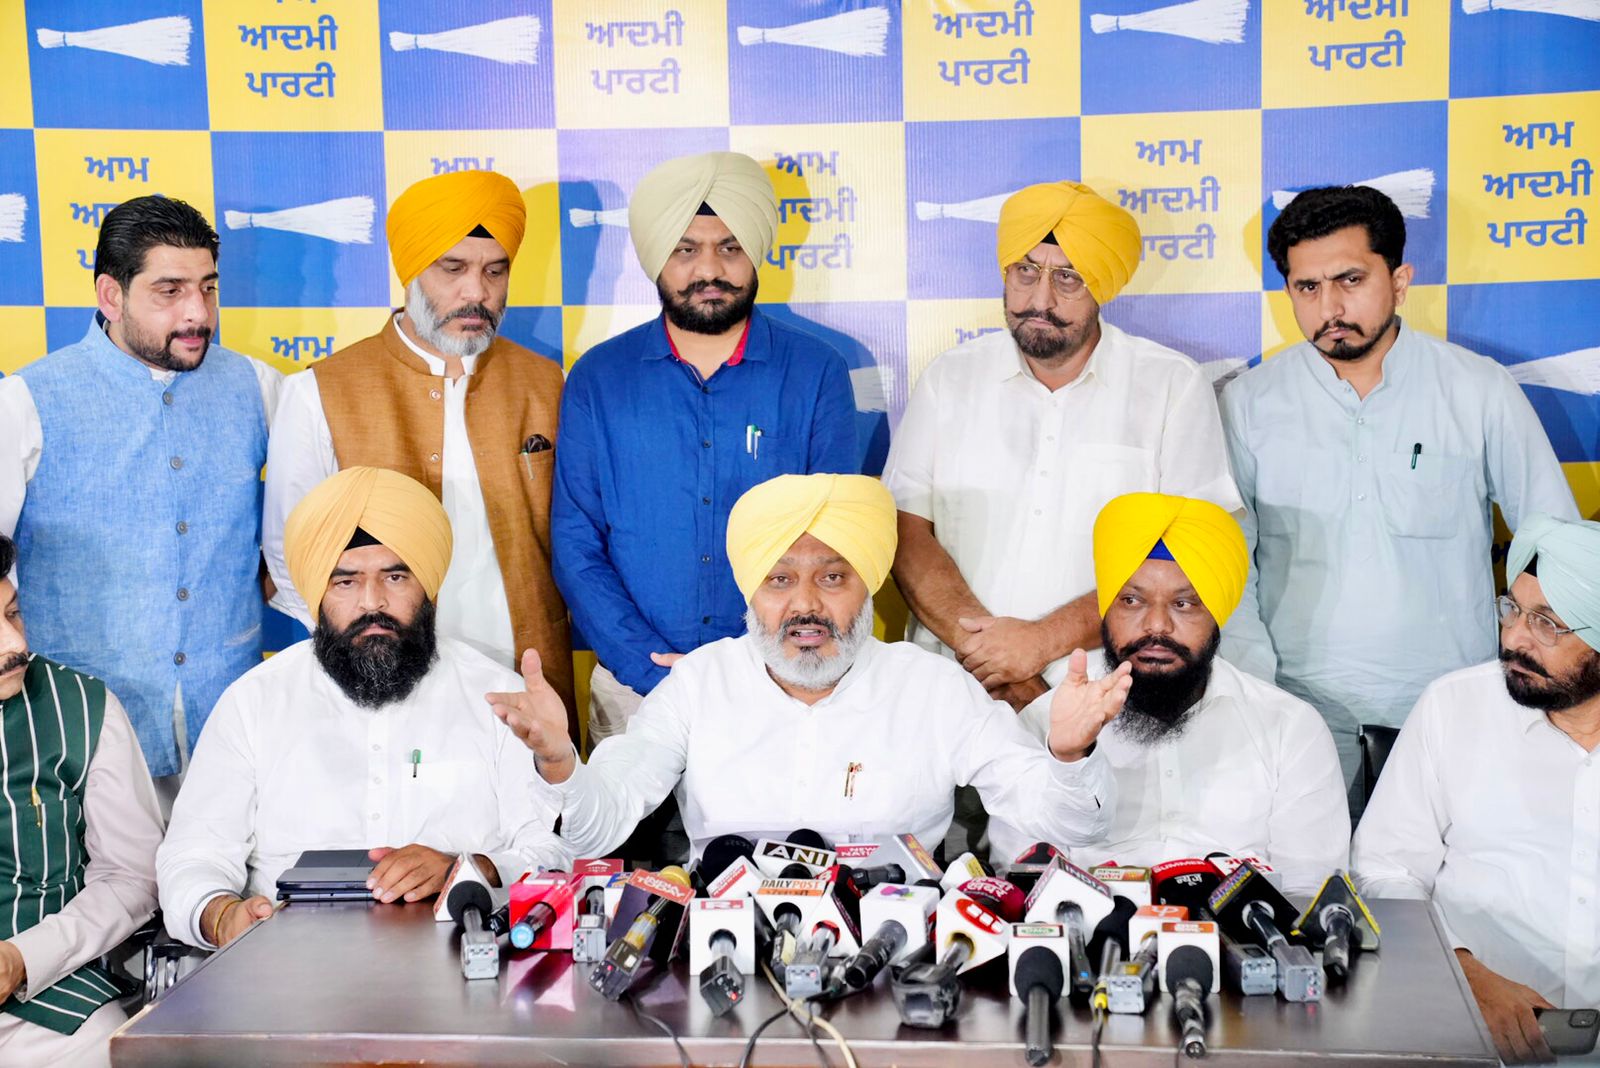 AAP submits complaint to DGP Punjab  against BJP for offering money to MLAs, BJP denies allegations